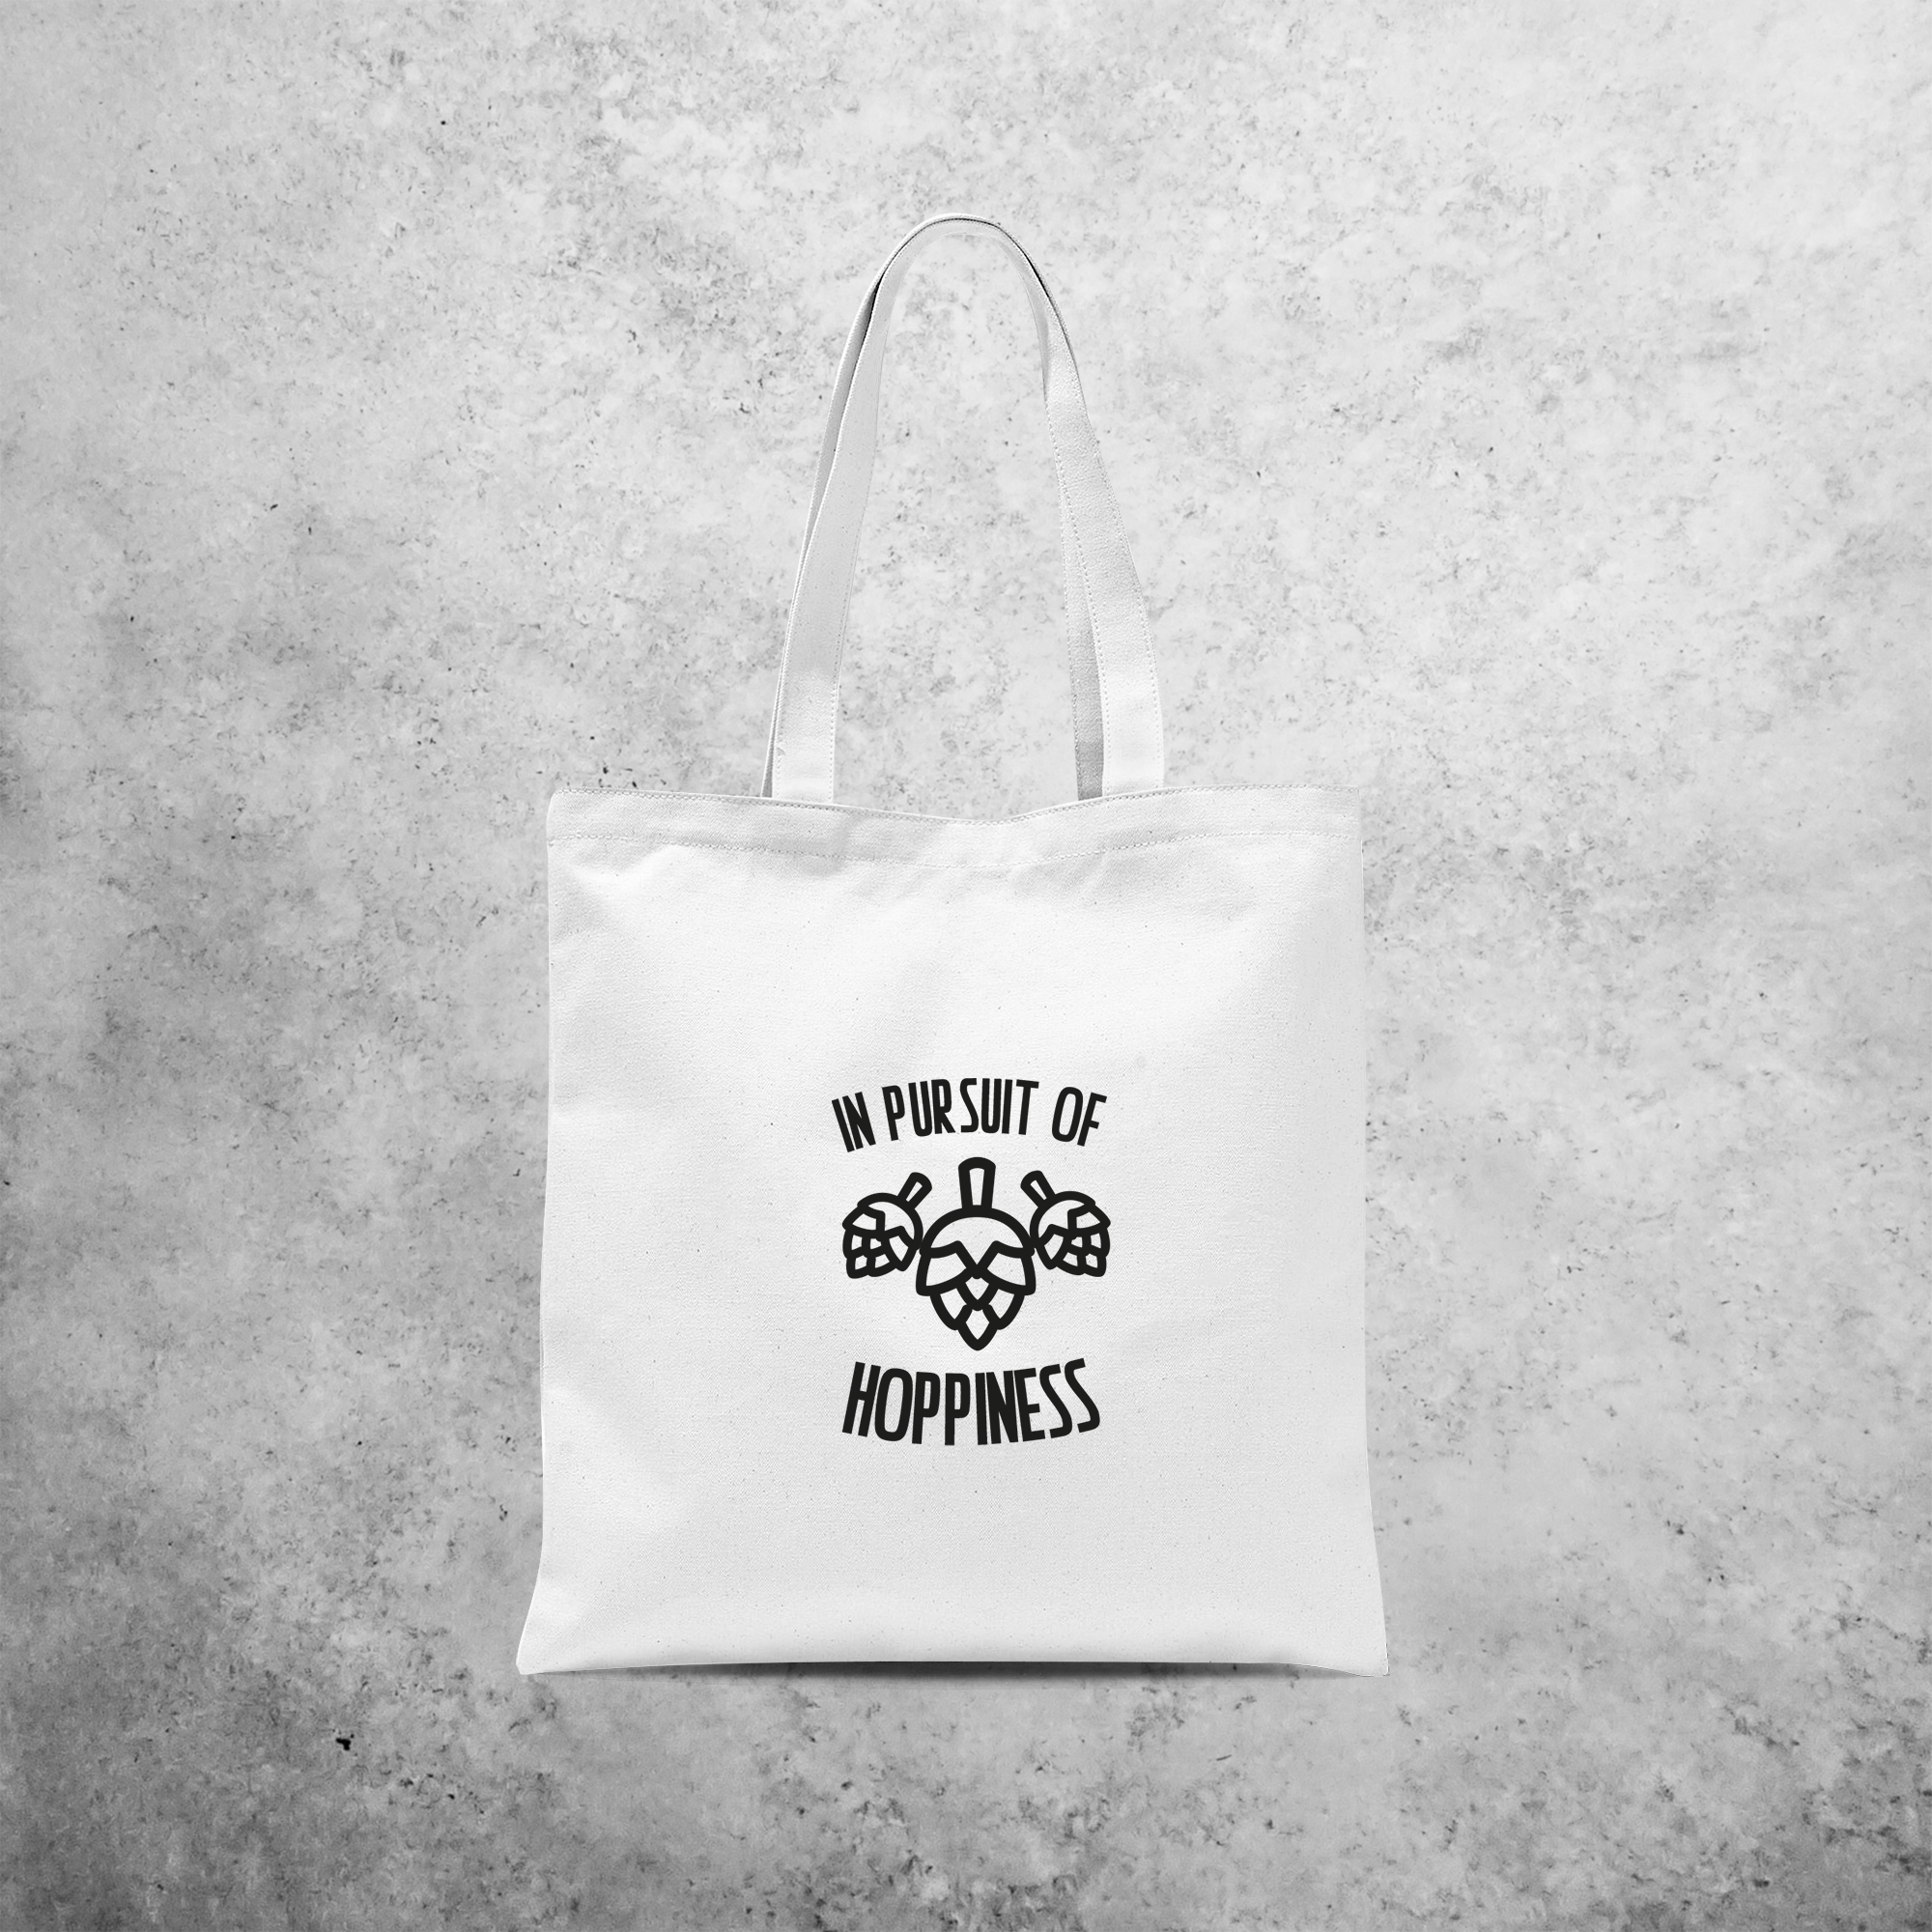 'In pursuit of hoppiness' tote bag